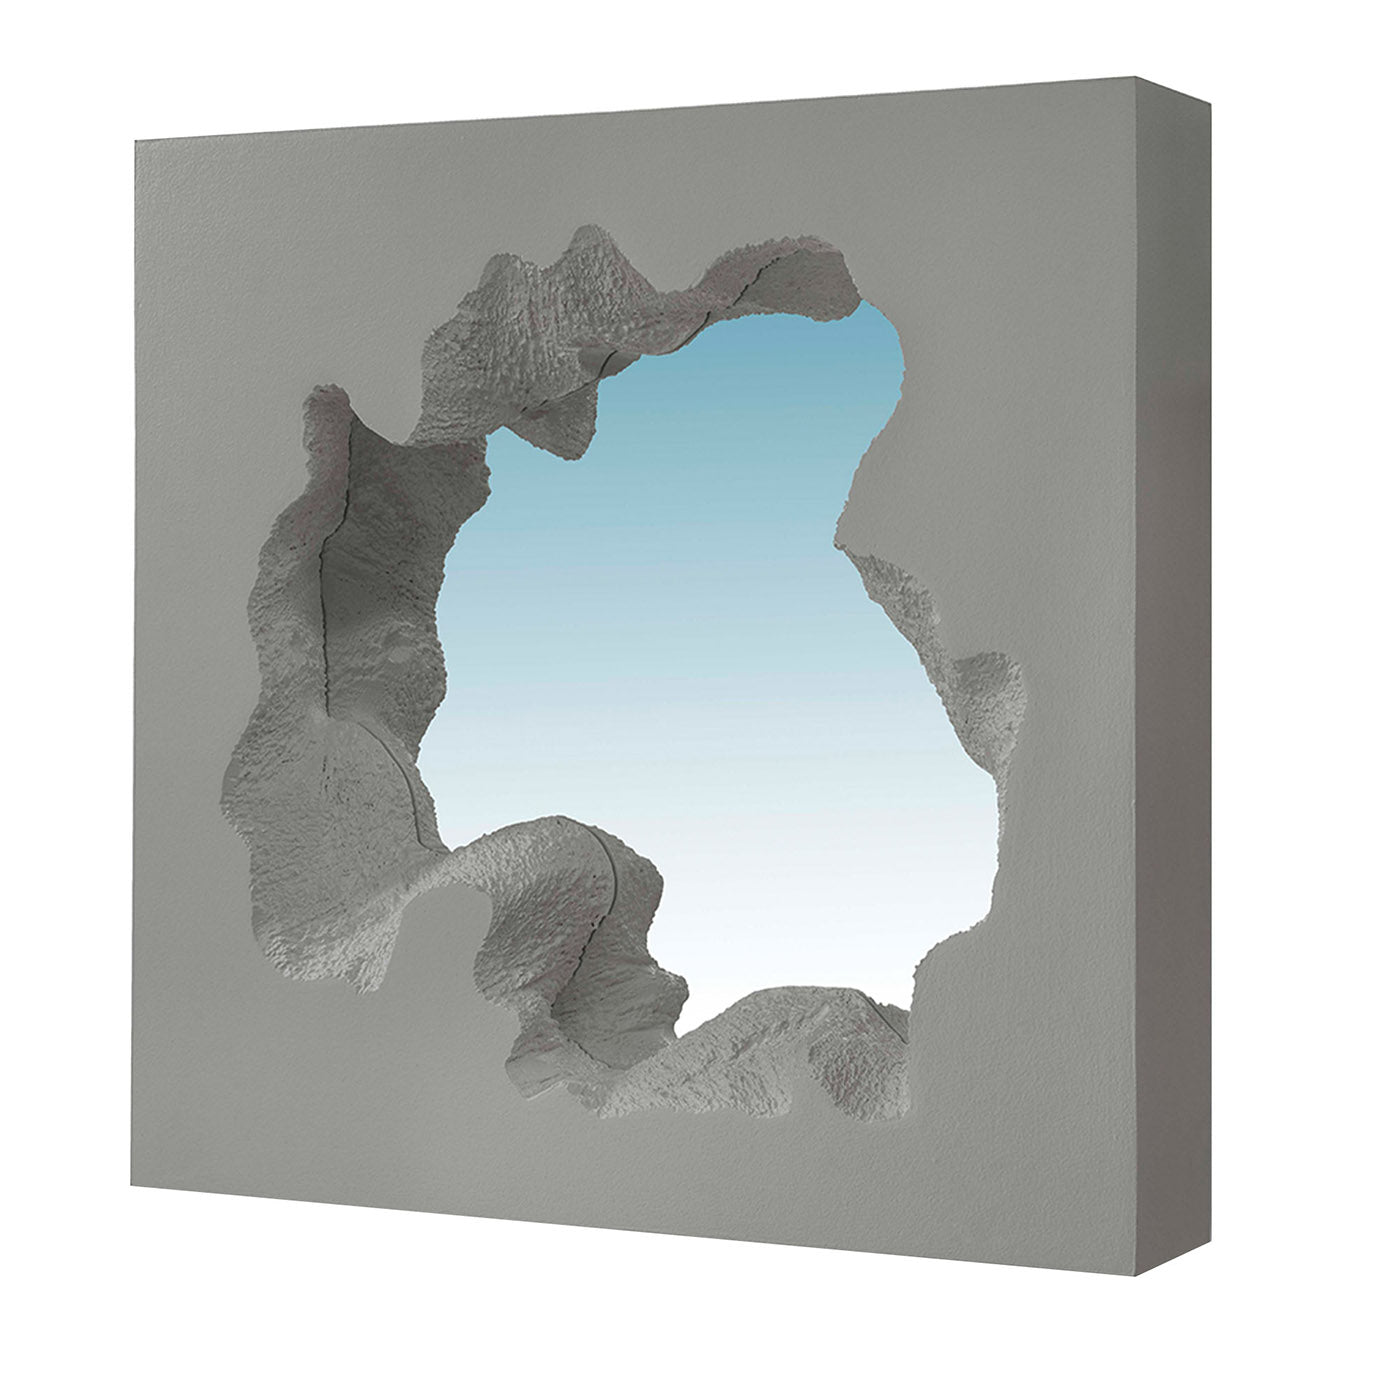 Broken Limited Edition Square Mirror by Snarkitecture - Main view